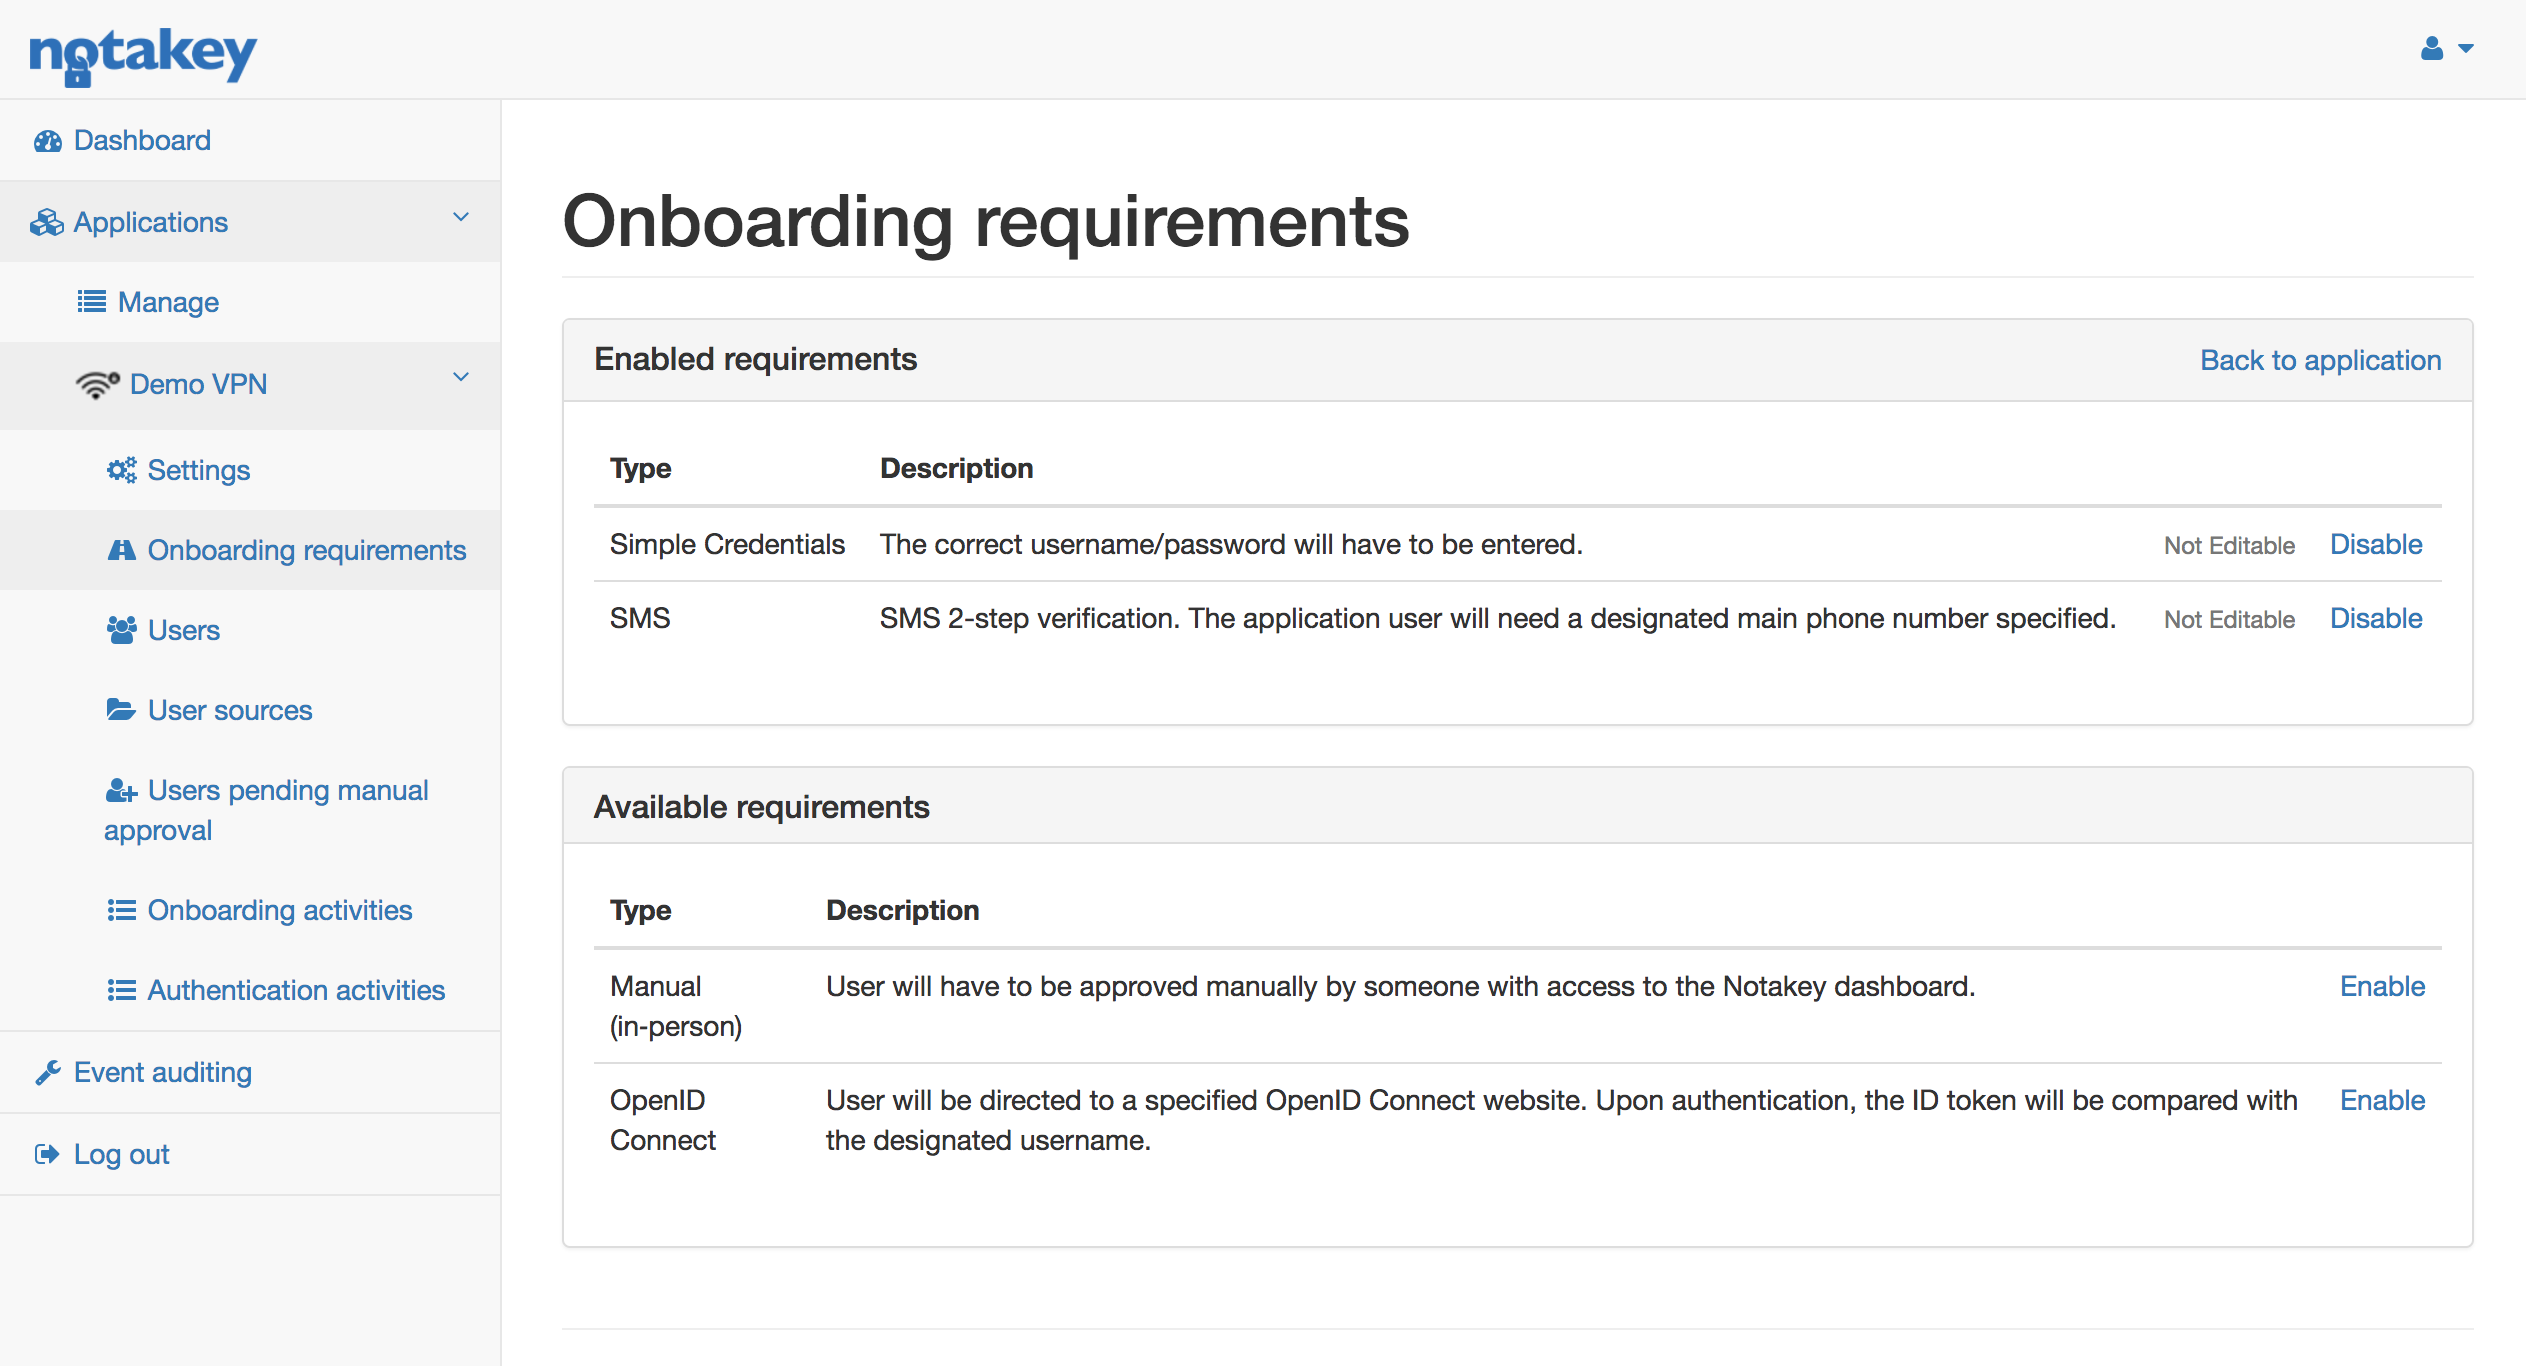 Onboarding requirements